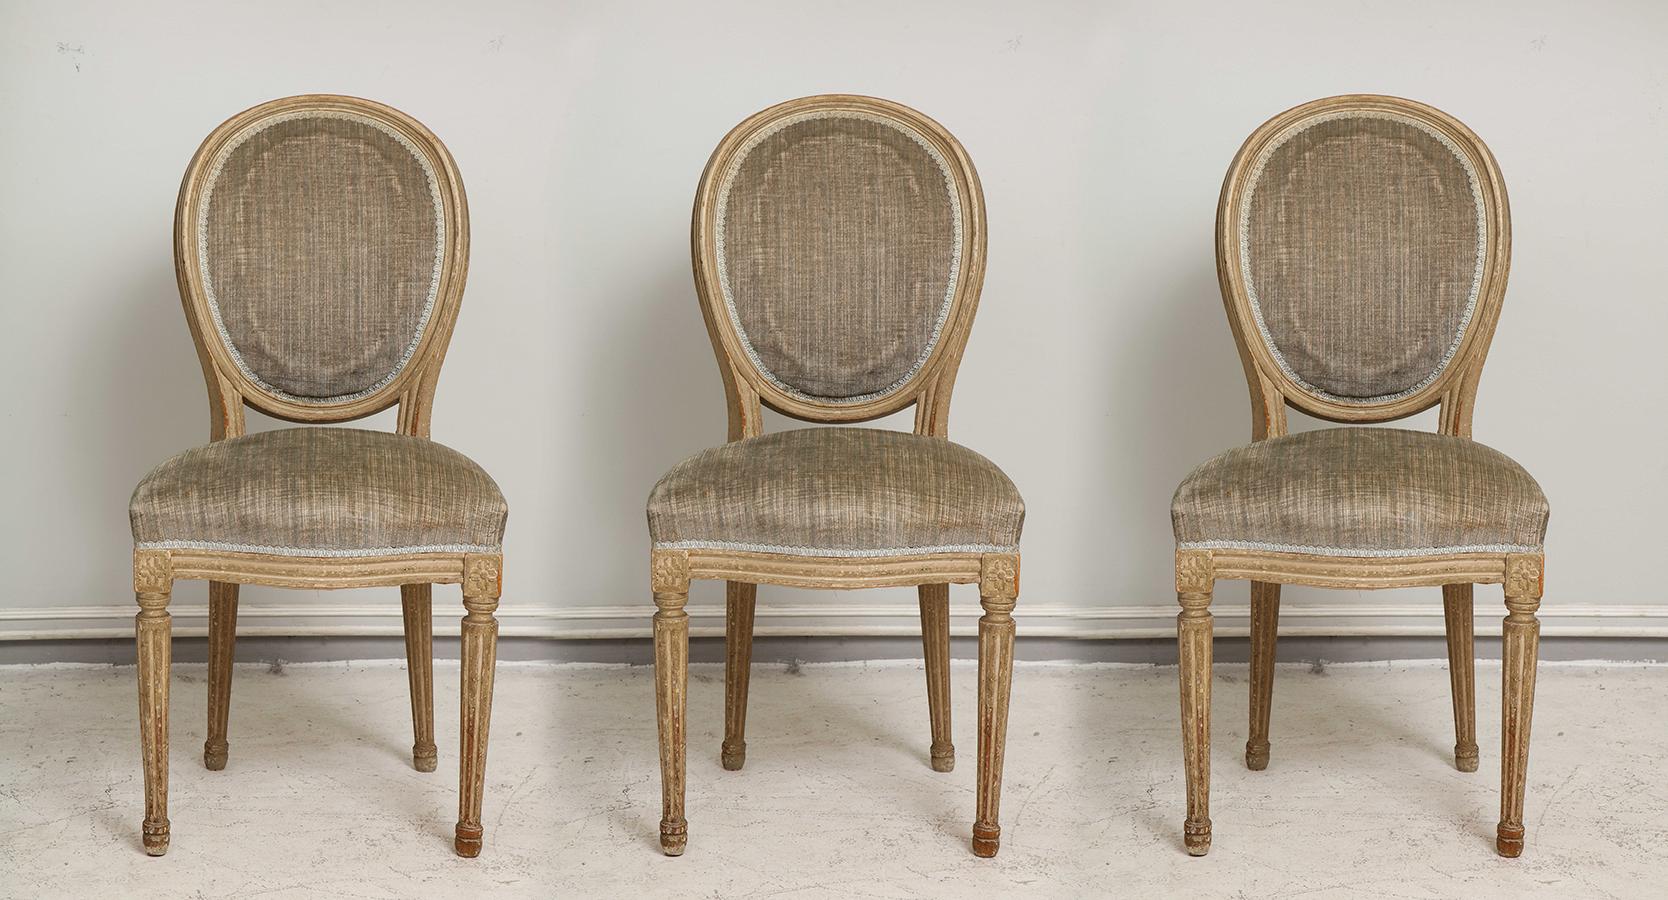 Set of six vintage Louis XVI -style painted dining room chairs- oval backs on fluted tapered legs.